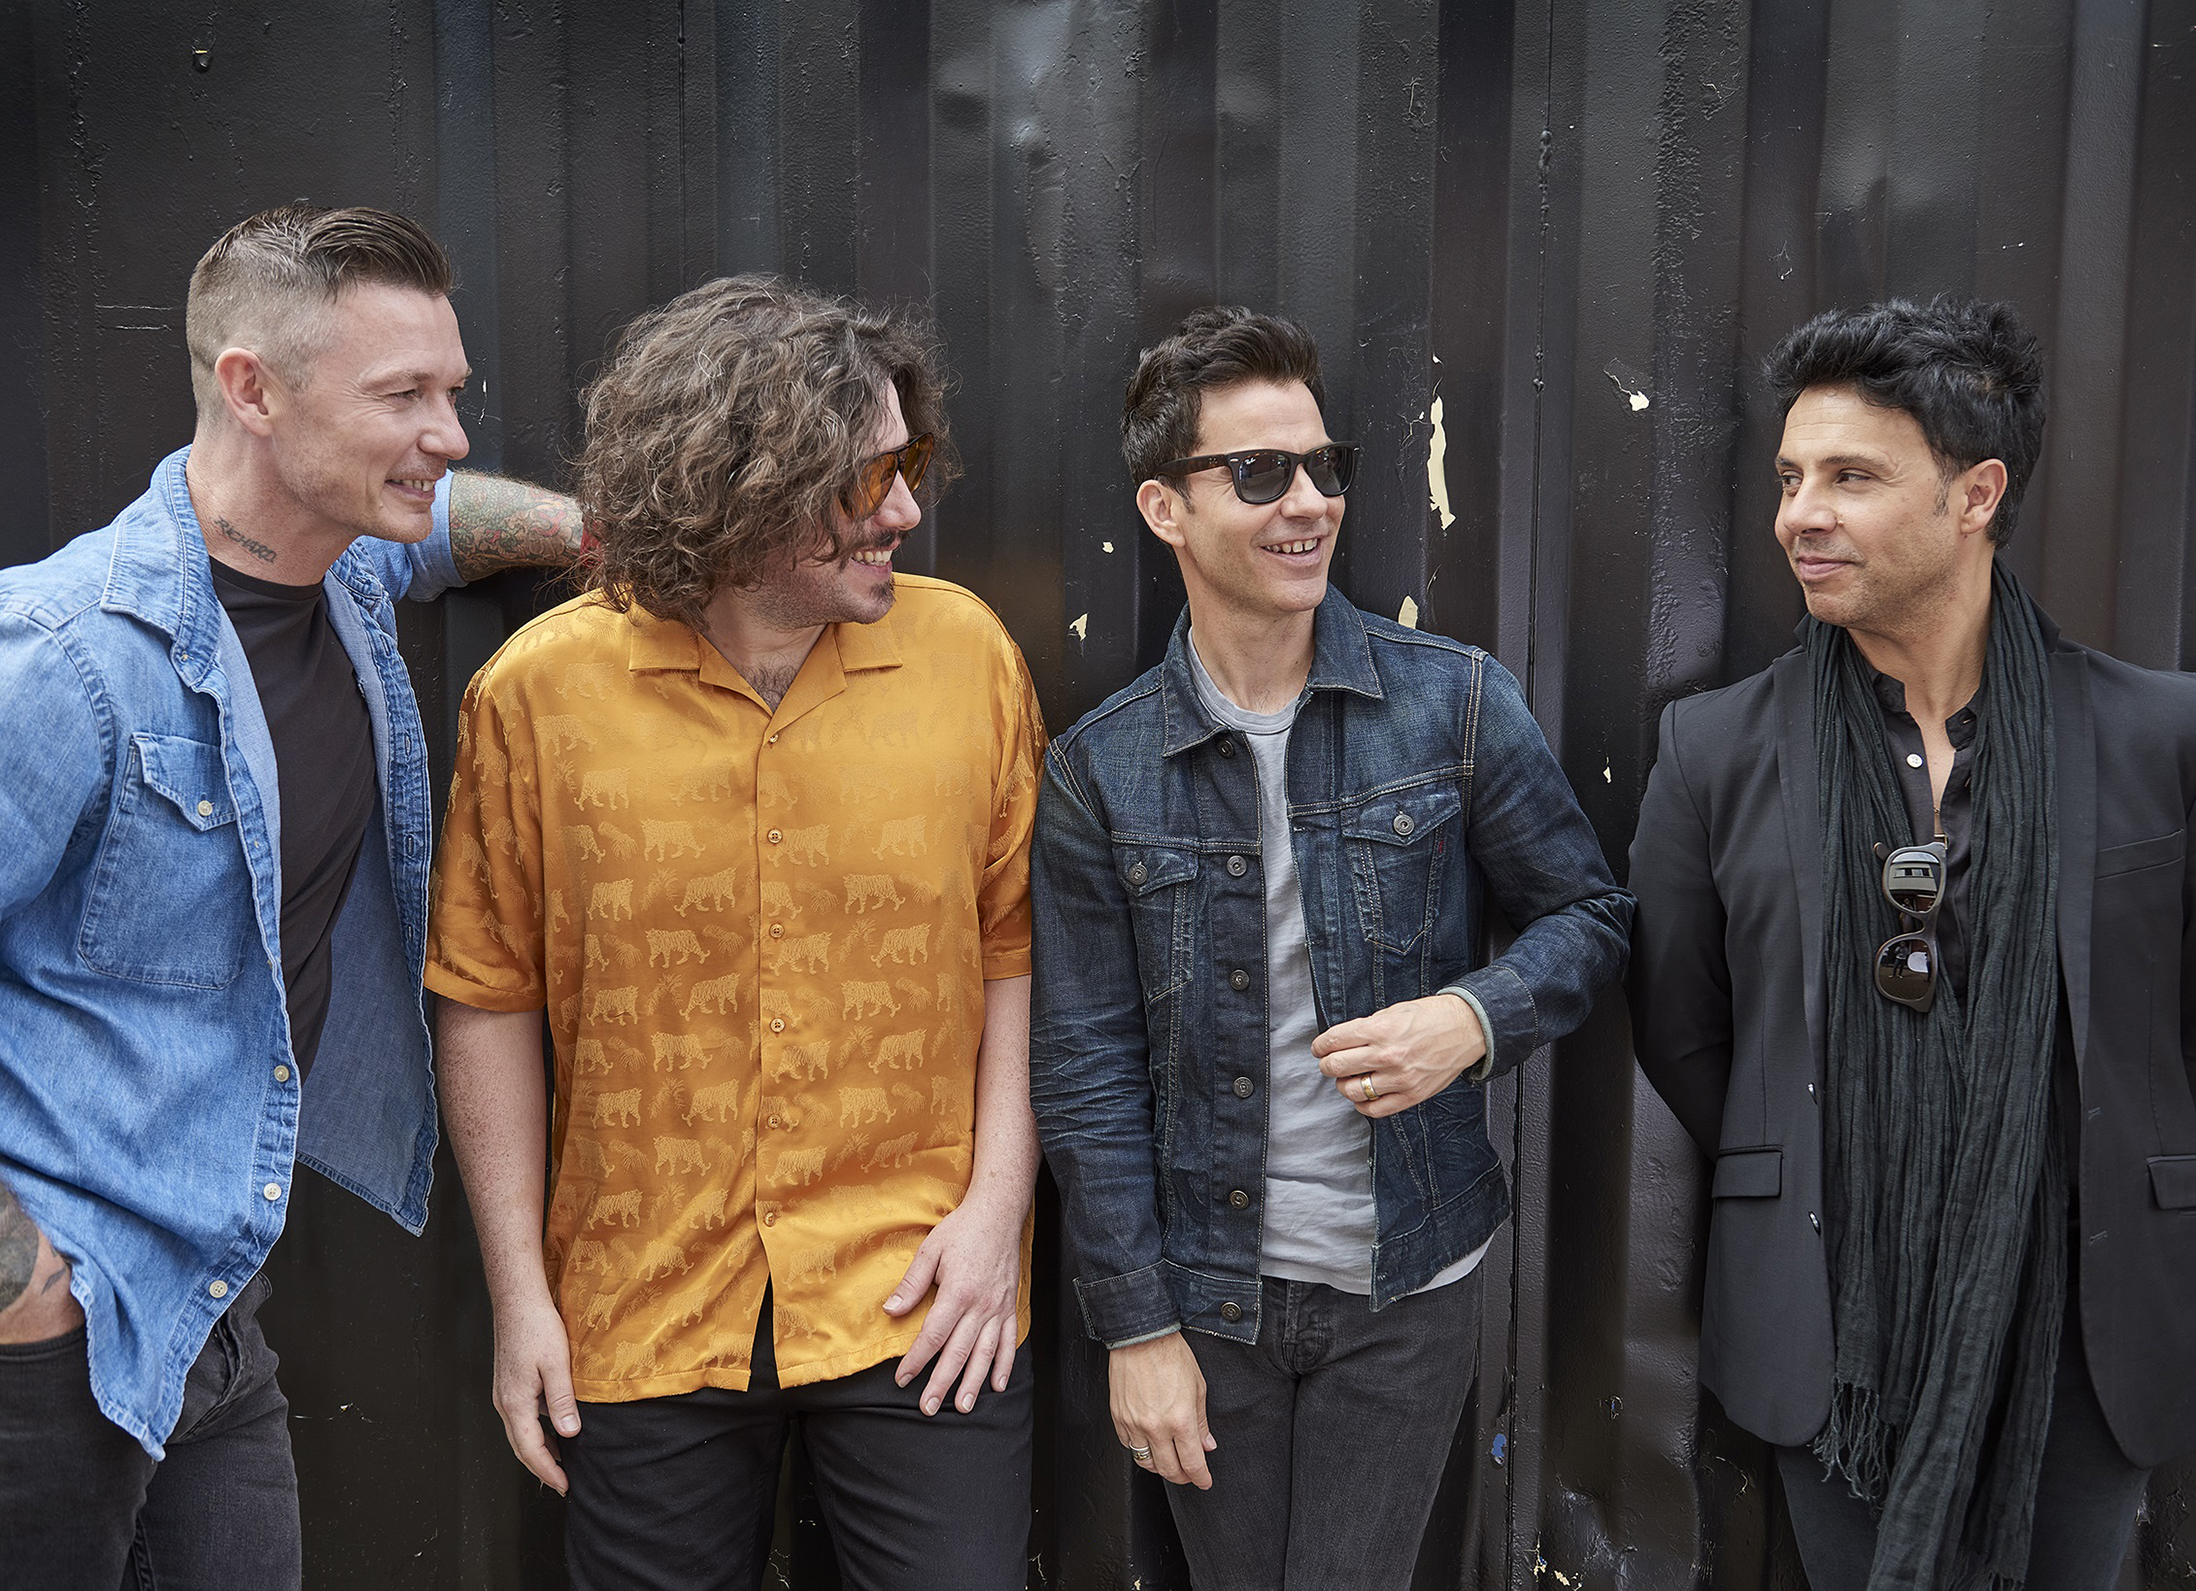 STEREOPHONICS announce new album ‘Oochya!’ - Hear first single 'Hanging On Your Hinges' 2